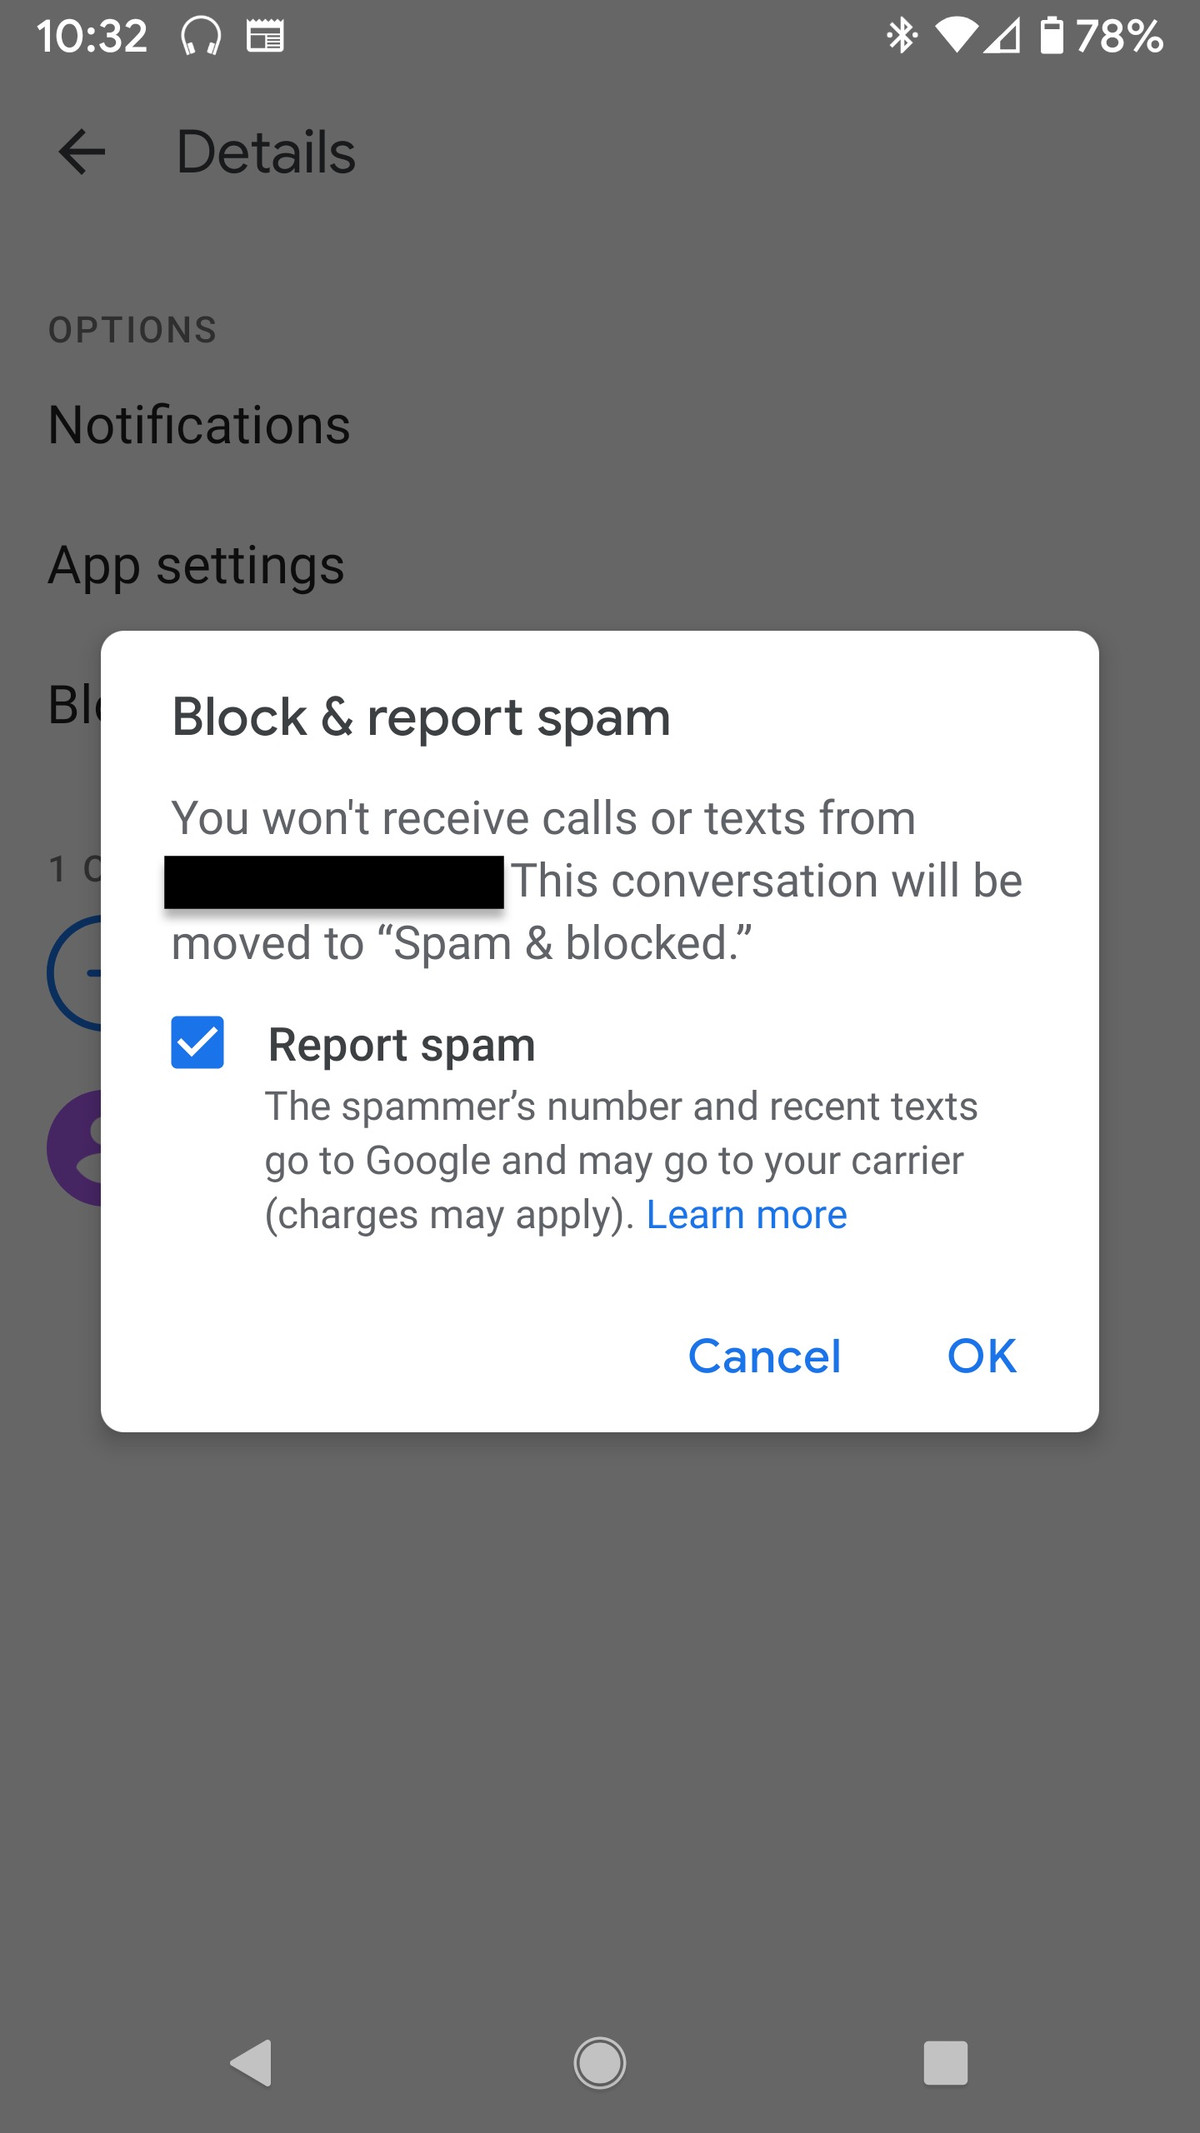 You can just block a spam text, or you can report it to Google.